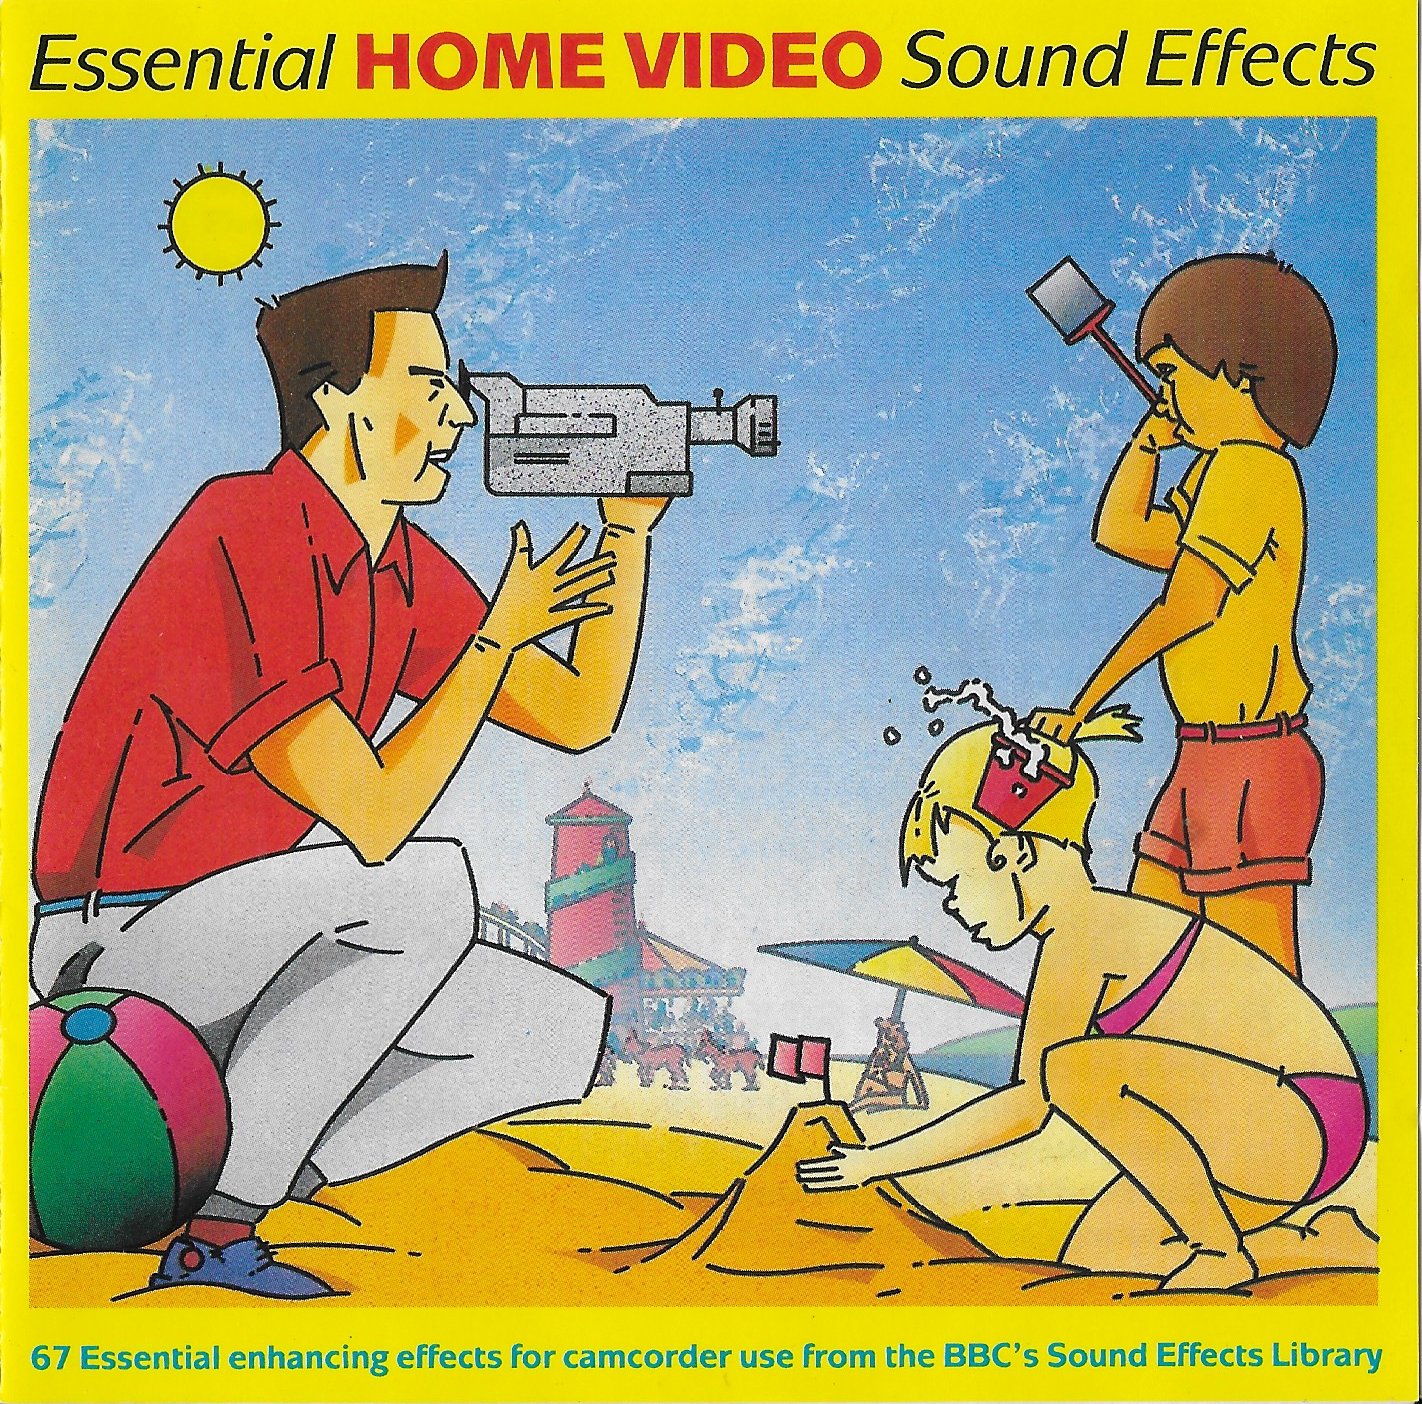 Picture of BBCCD853 Essential home video sound effects by artist Various from the BBC cds - Records and Tapes library